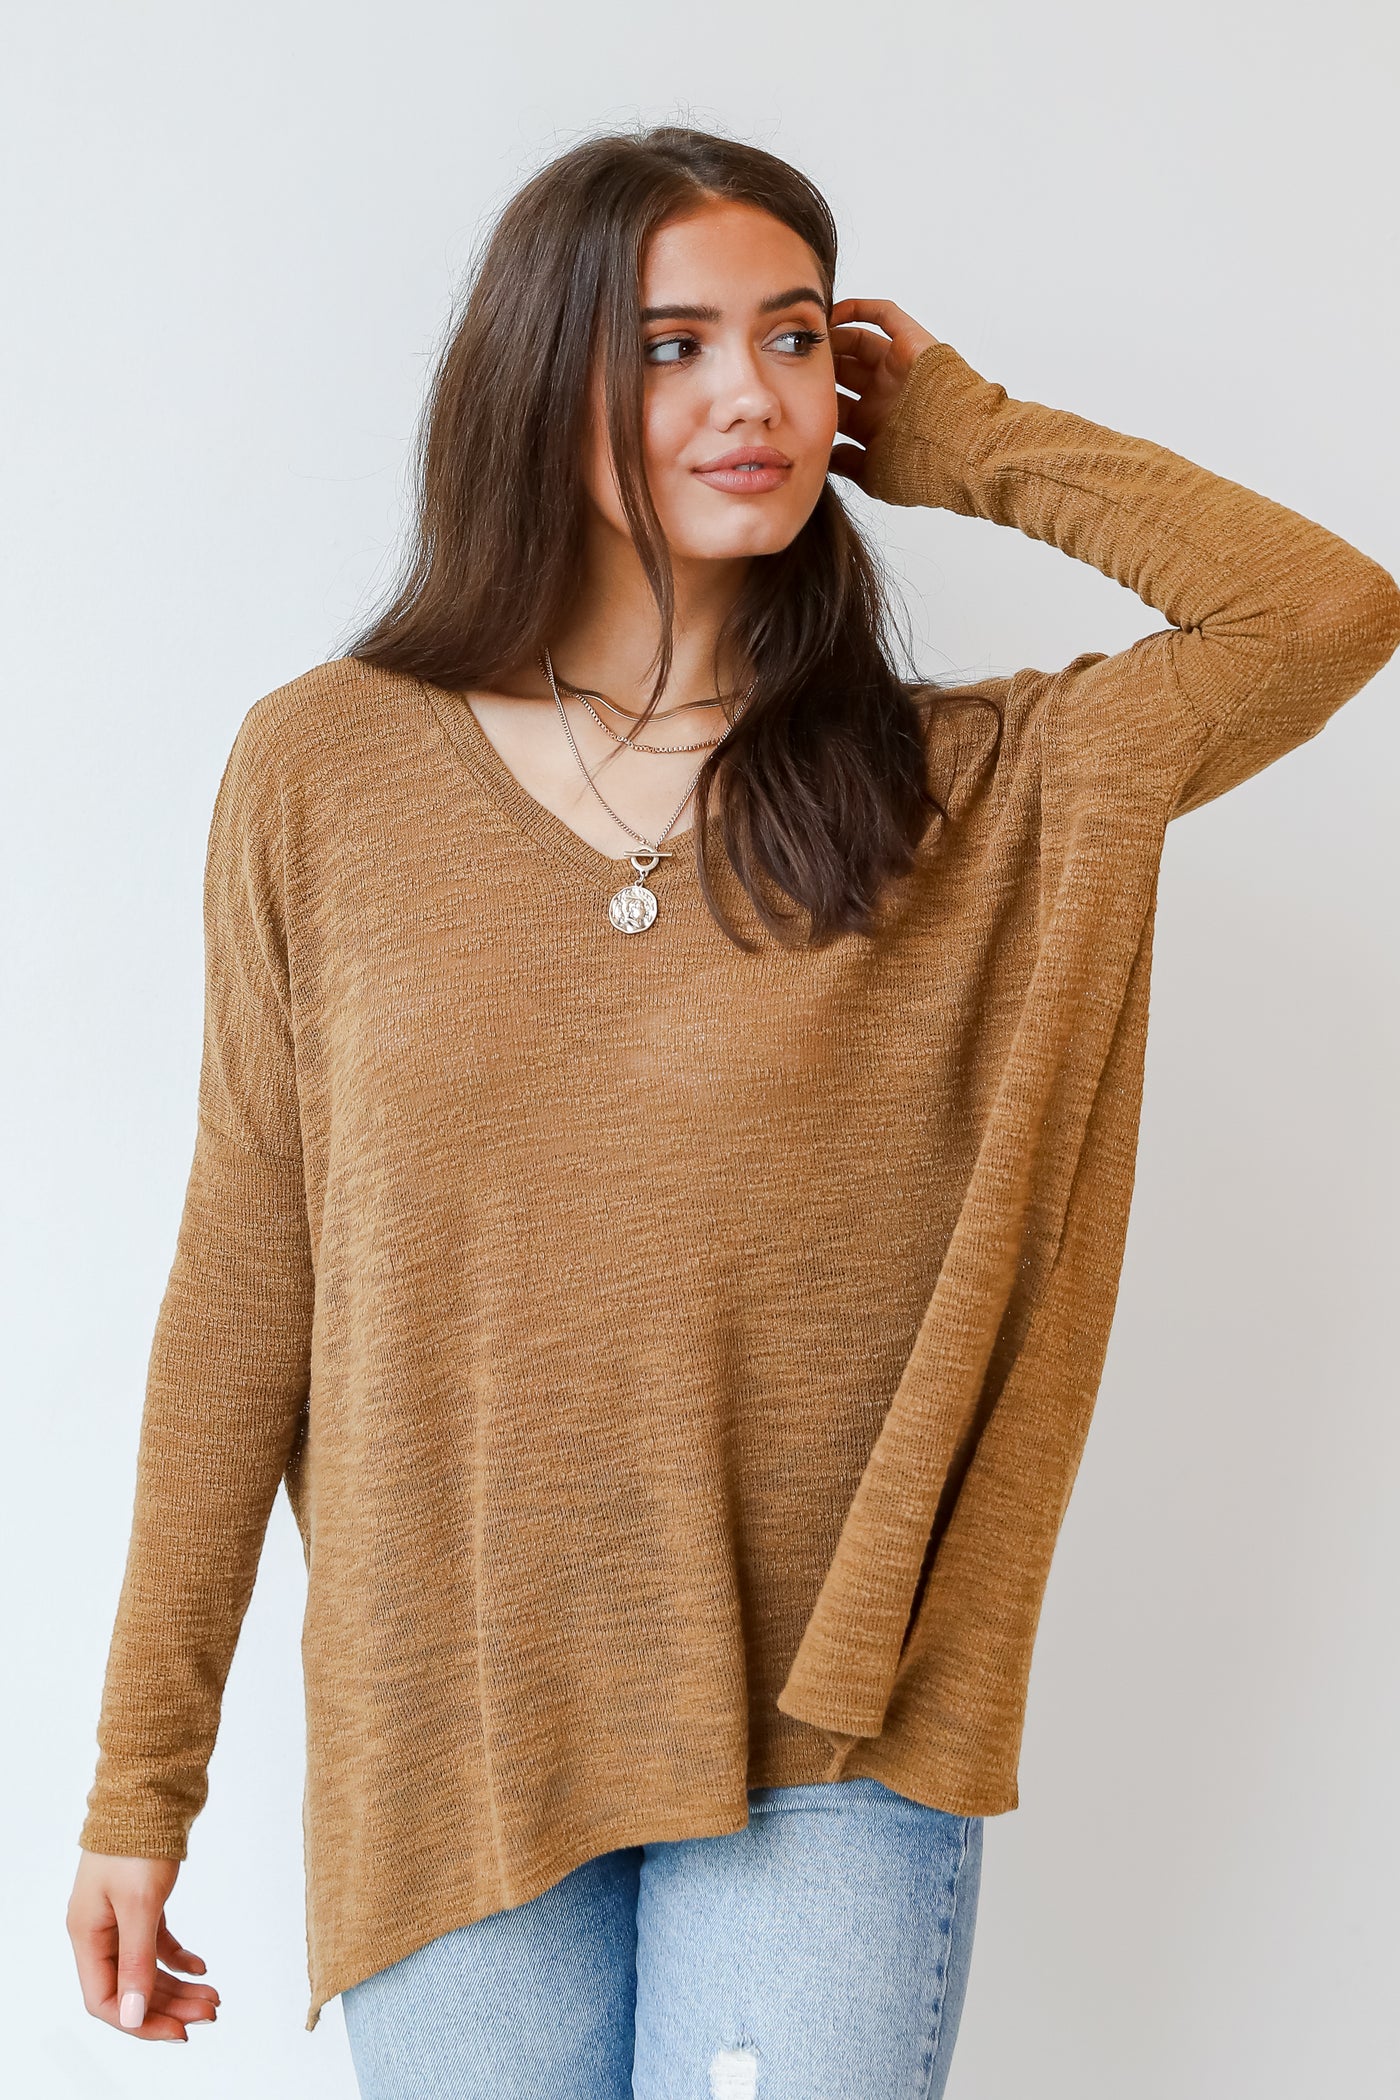 Set The Mood Oversized Knit Top